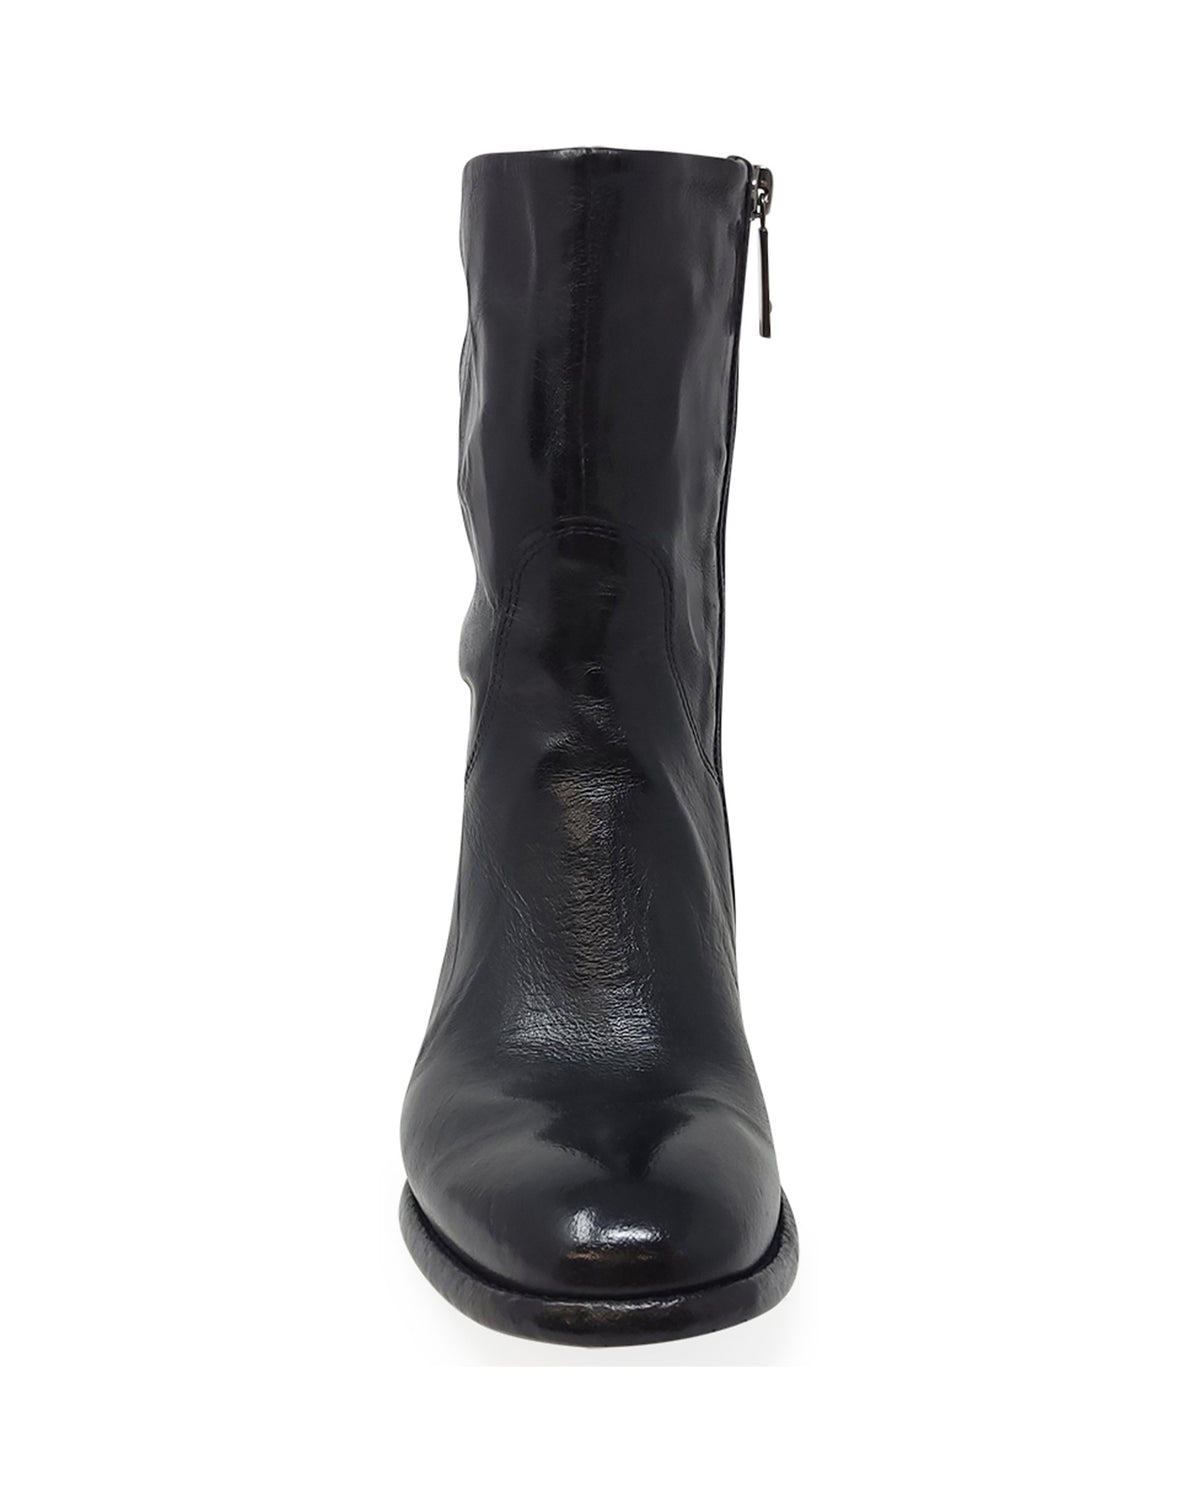 Black Leather Mid Calf Boot